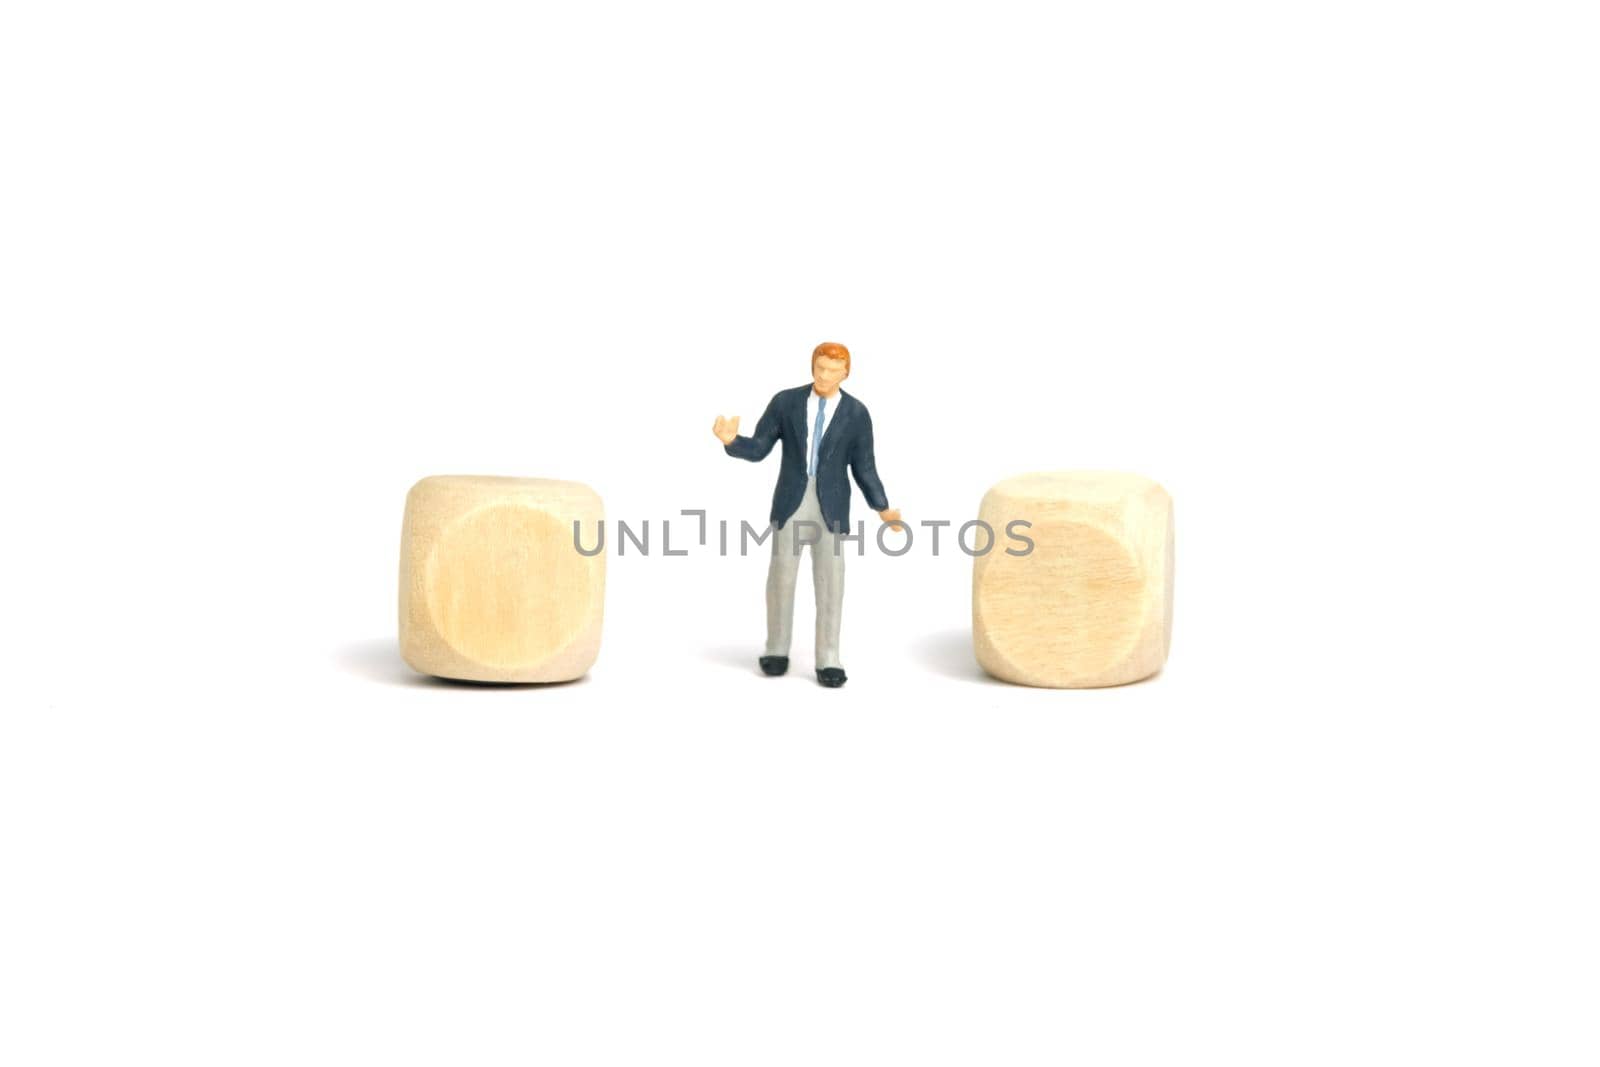 Miniature people toy figure photography. A shrugging businessman standing in the middle of two blank wooden dice. Isolated on white background. Image photo by Macrostud